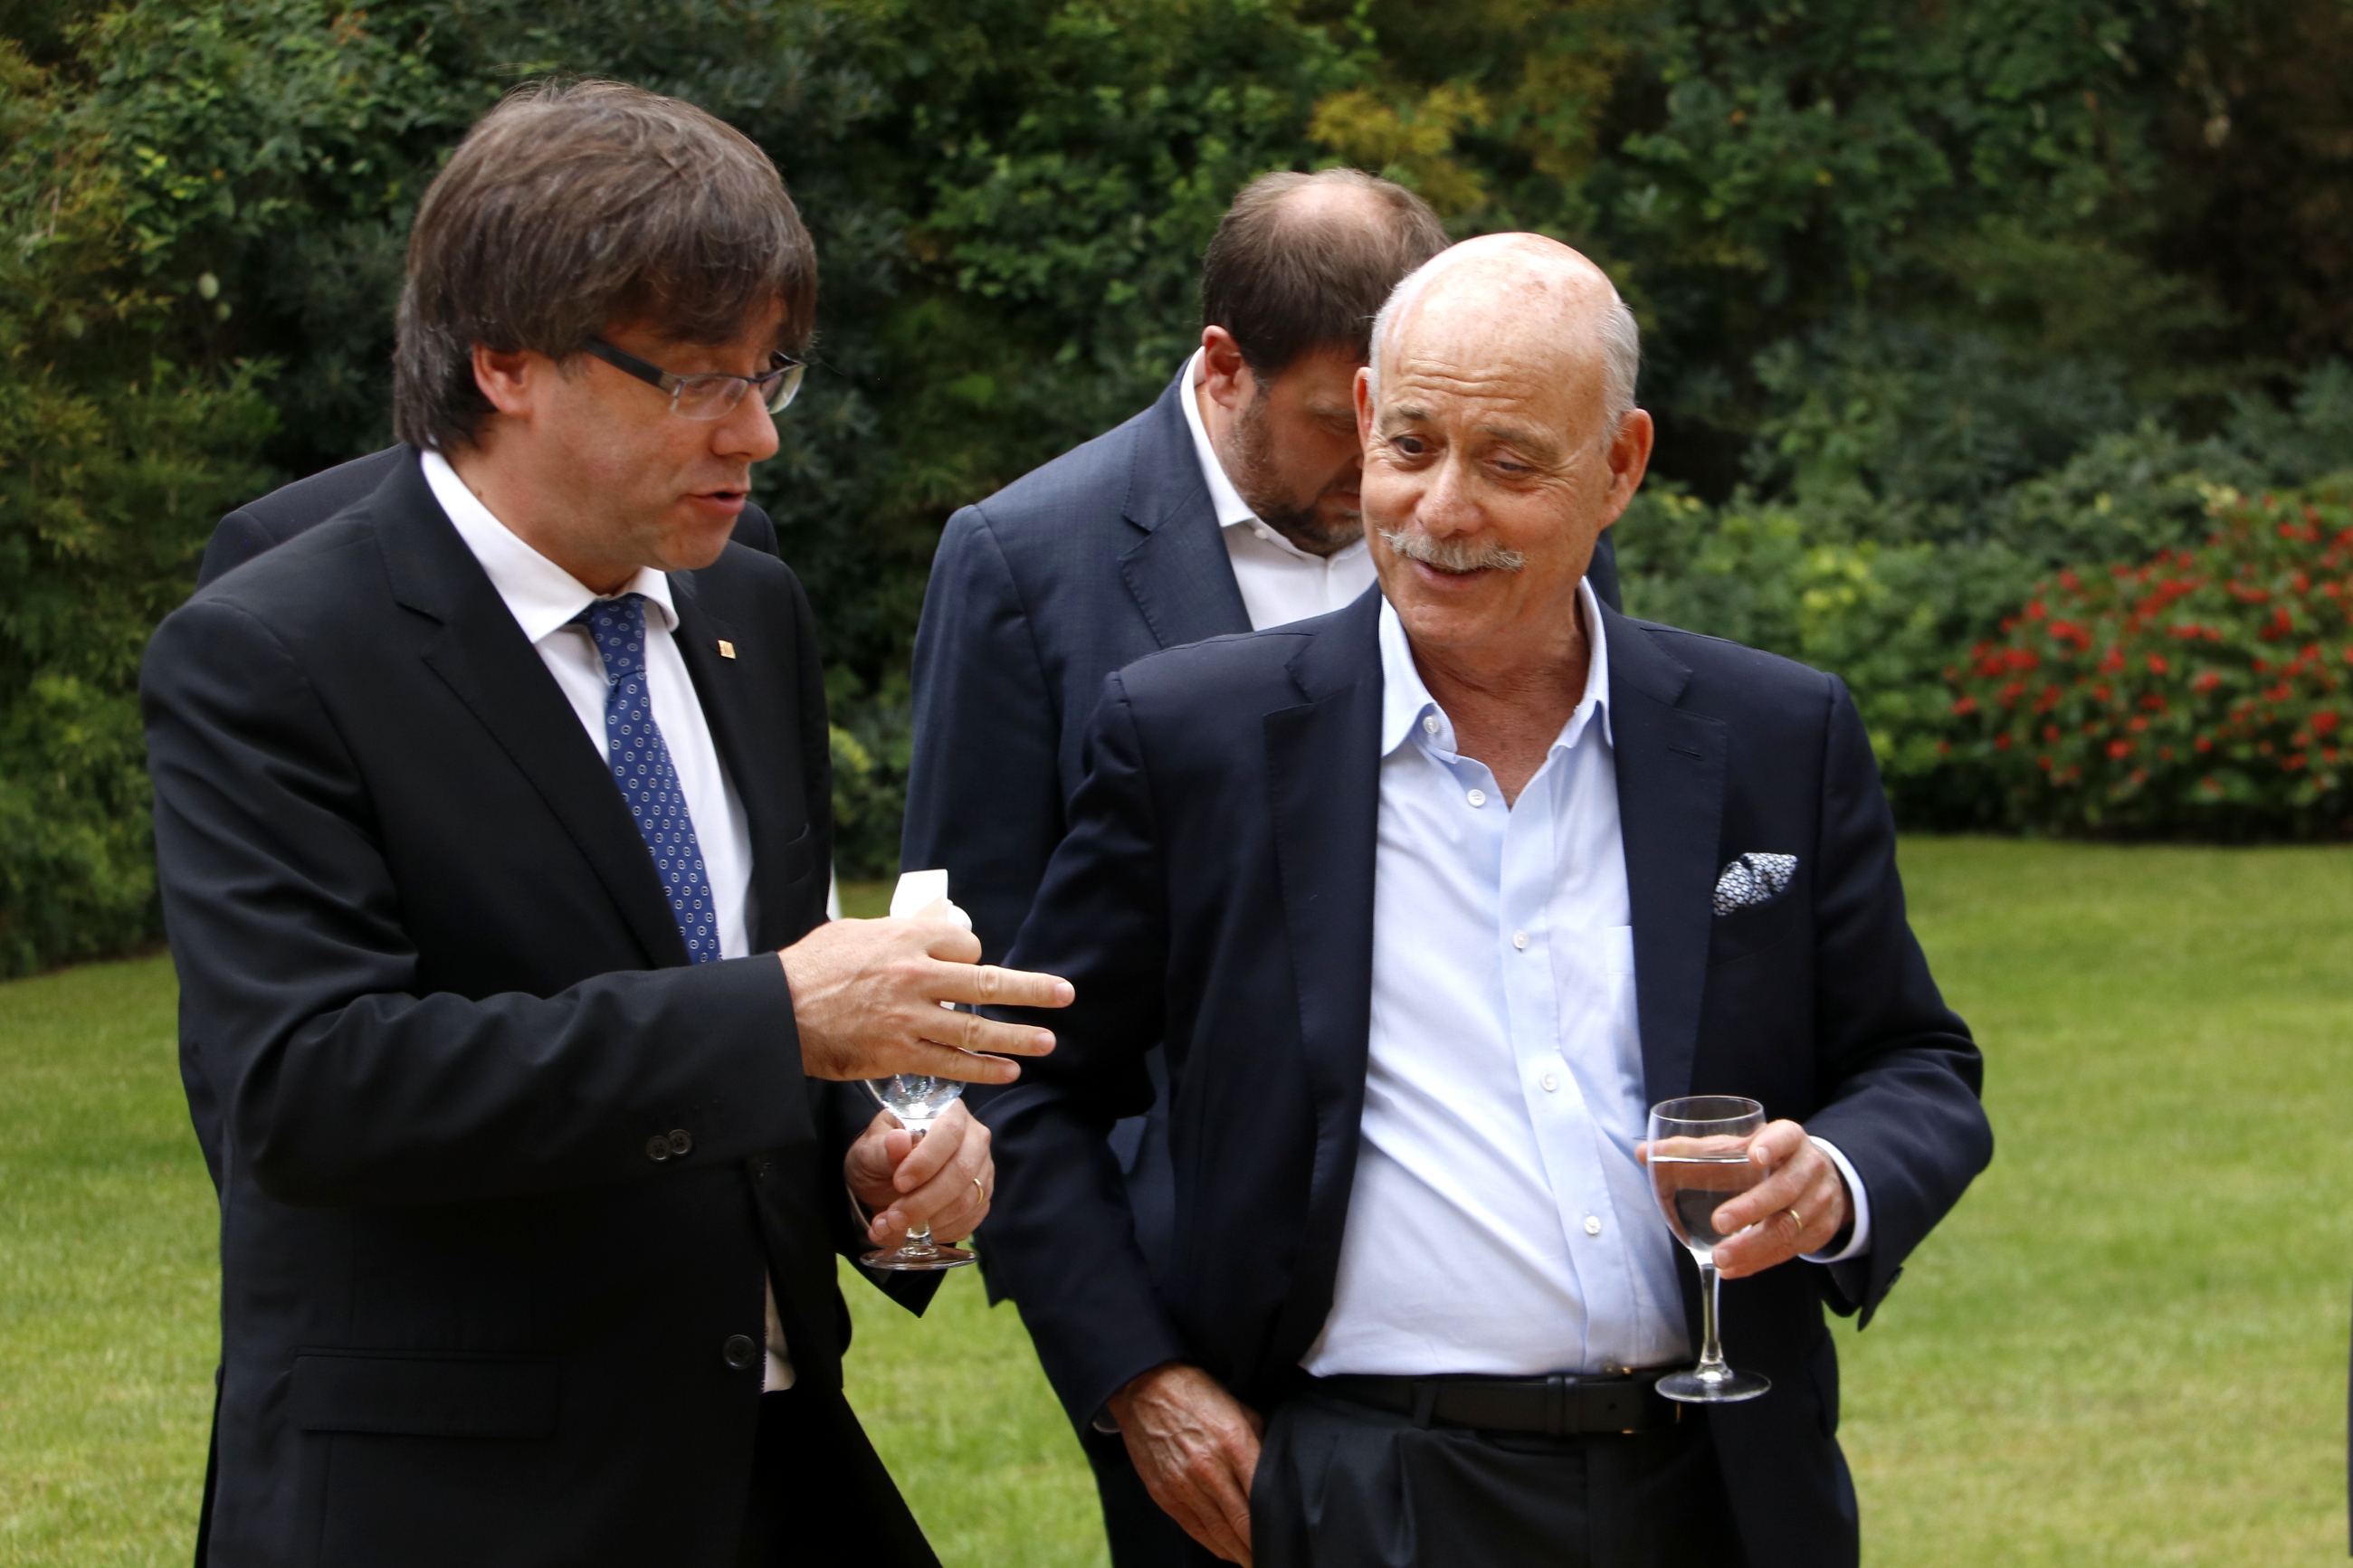 The sociologist, economist and political advisor Jeremy Rifkin with Catalan President Carles Puigdemont (by ACN)